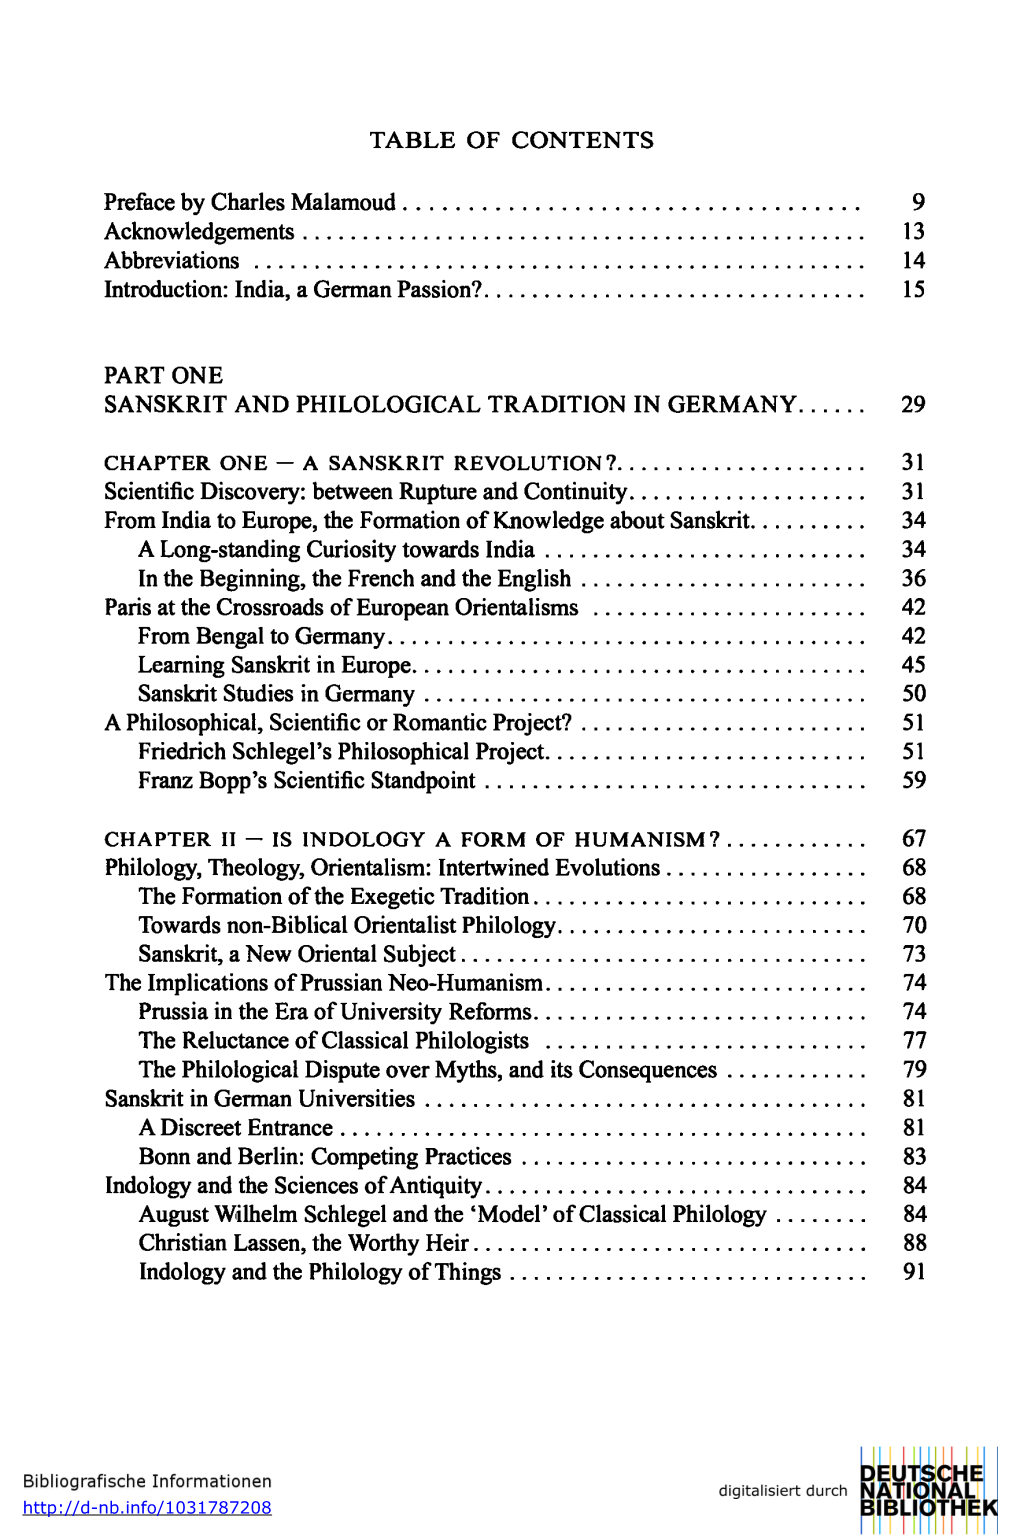 TABLE of CONTENTS Preface by Charles Malamoud 9 Acknowledgements 13 Abbreviations 14 Introduction: India, a German Passion? 15 P